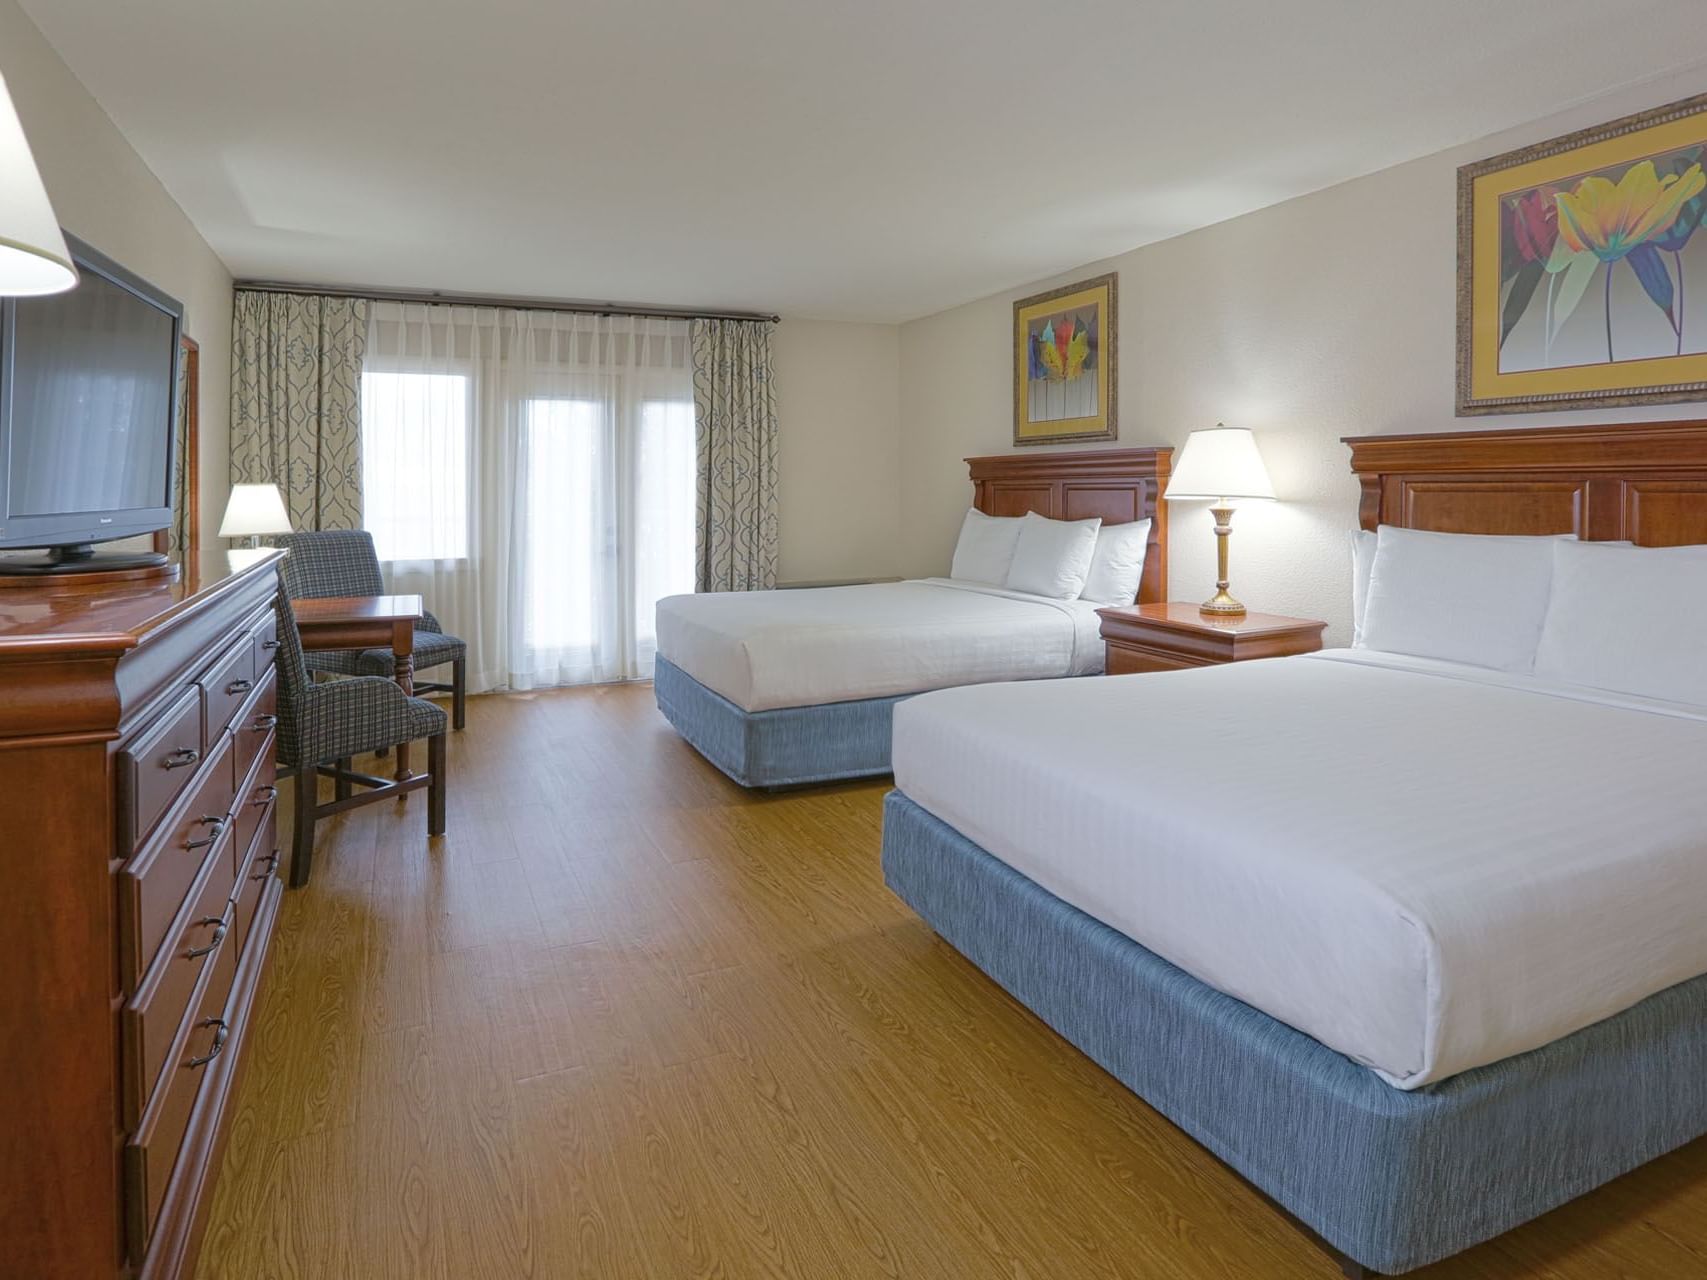 Deluxe Queen Room with a Waterpark view at Music Road Resort